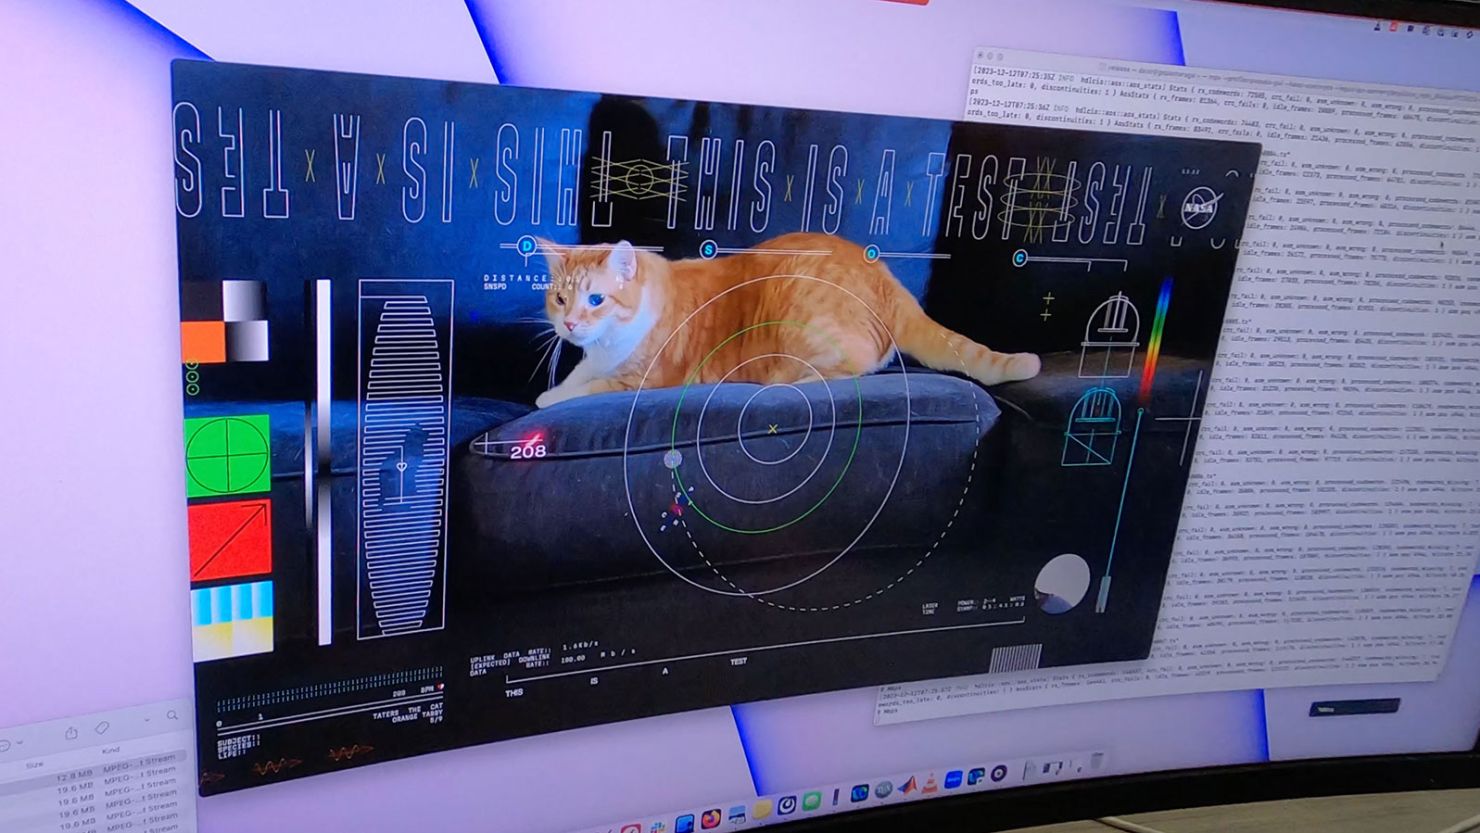 Meow from Mars: Nasa streams cat video from craft 30 million km away